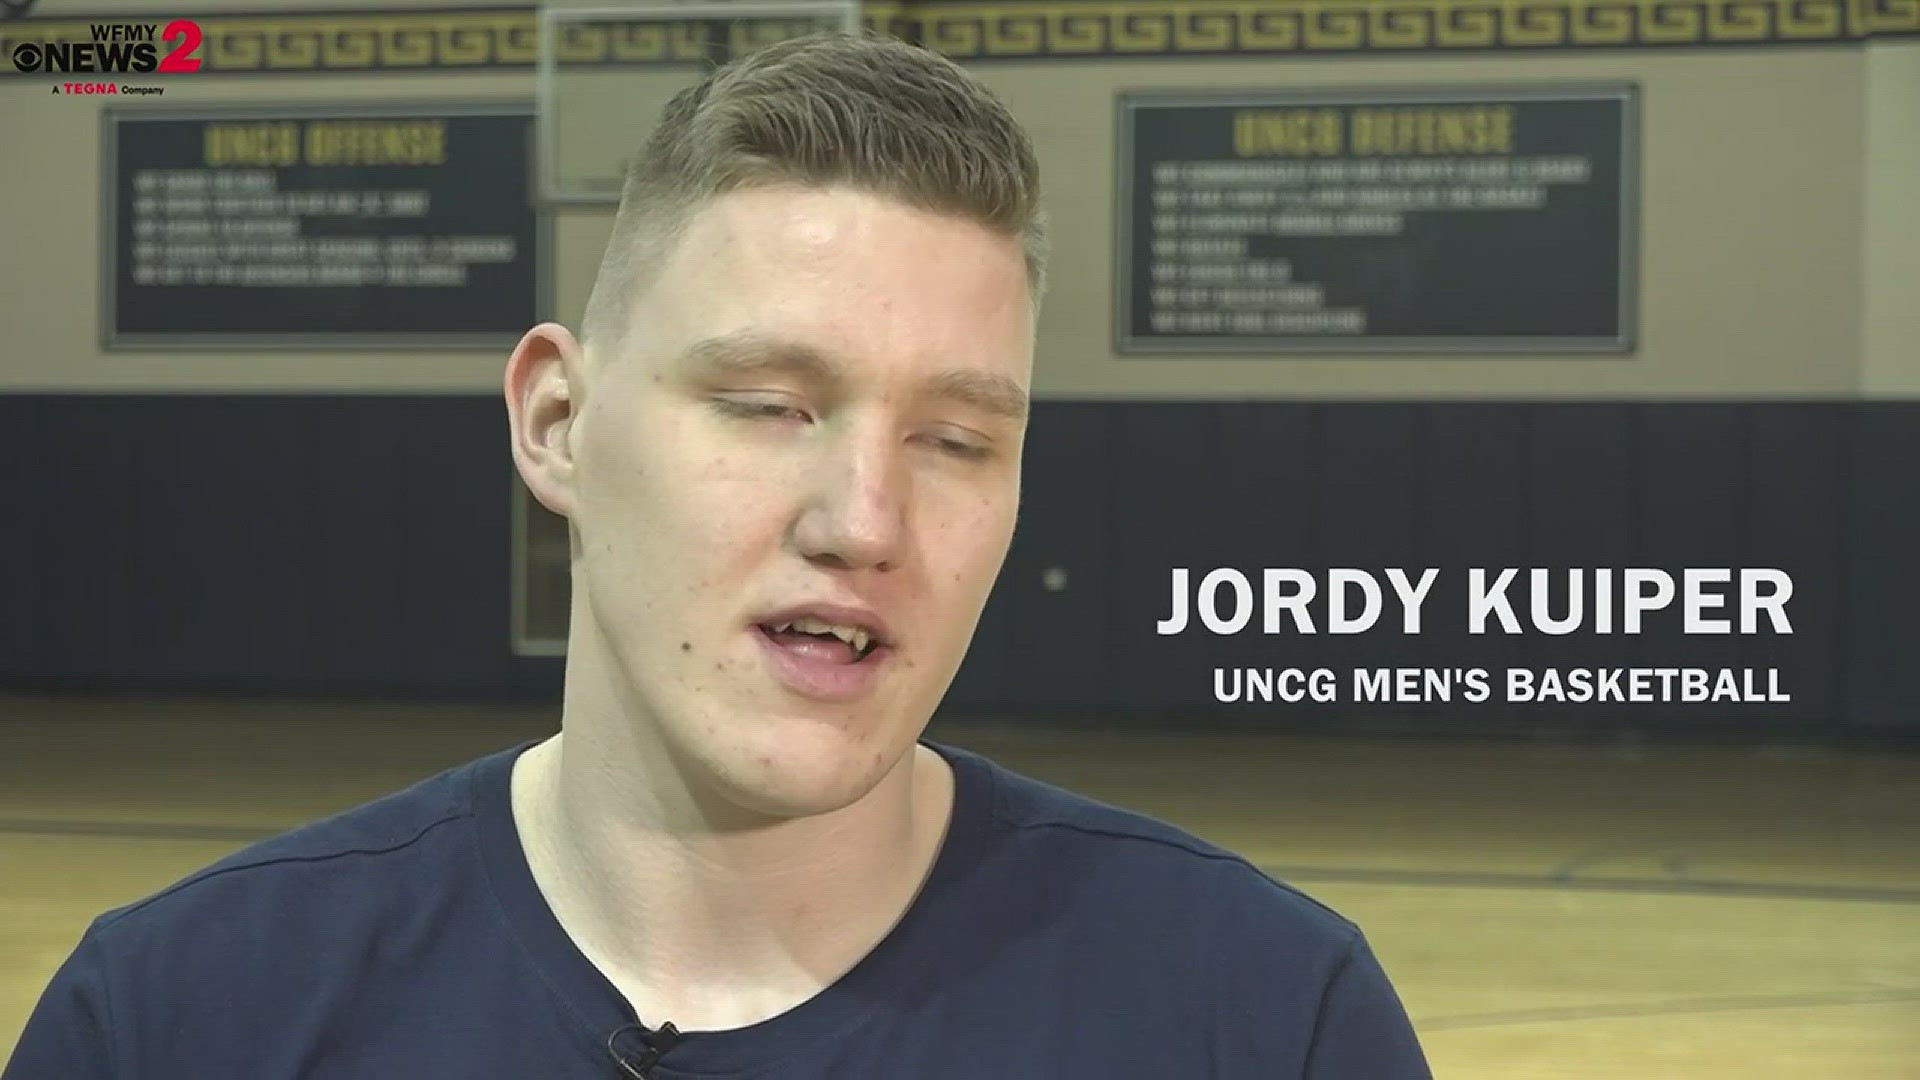 UNCG's Jordy Kuiper reminisces about his five years with the men's basketball team and talks about what's next for the Spartan's stellar player.